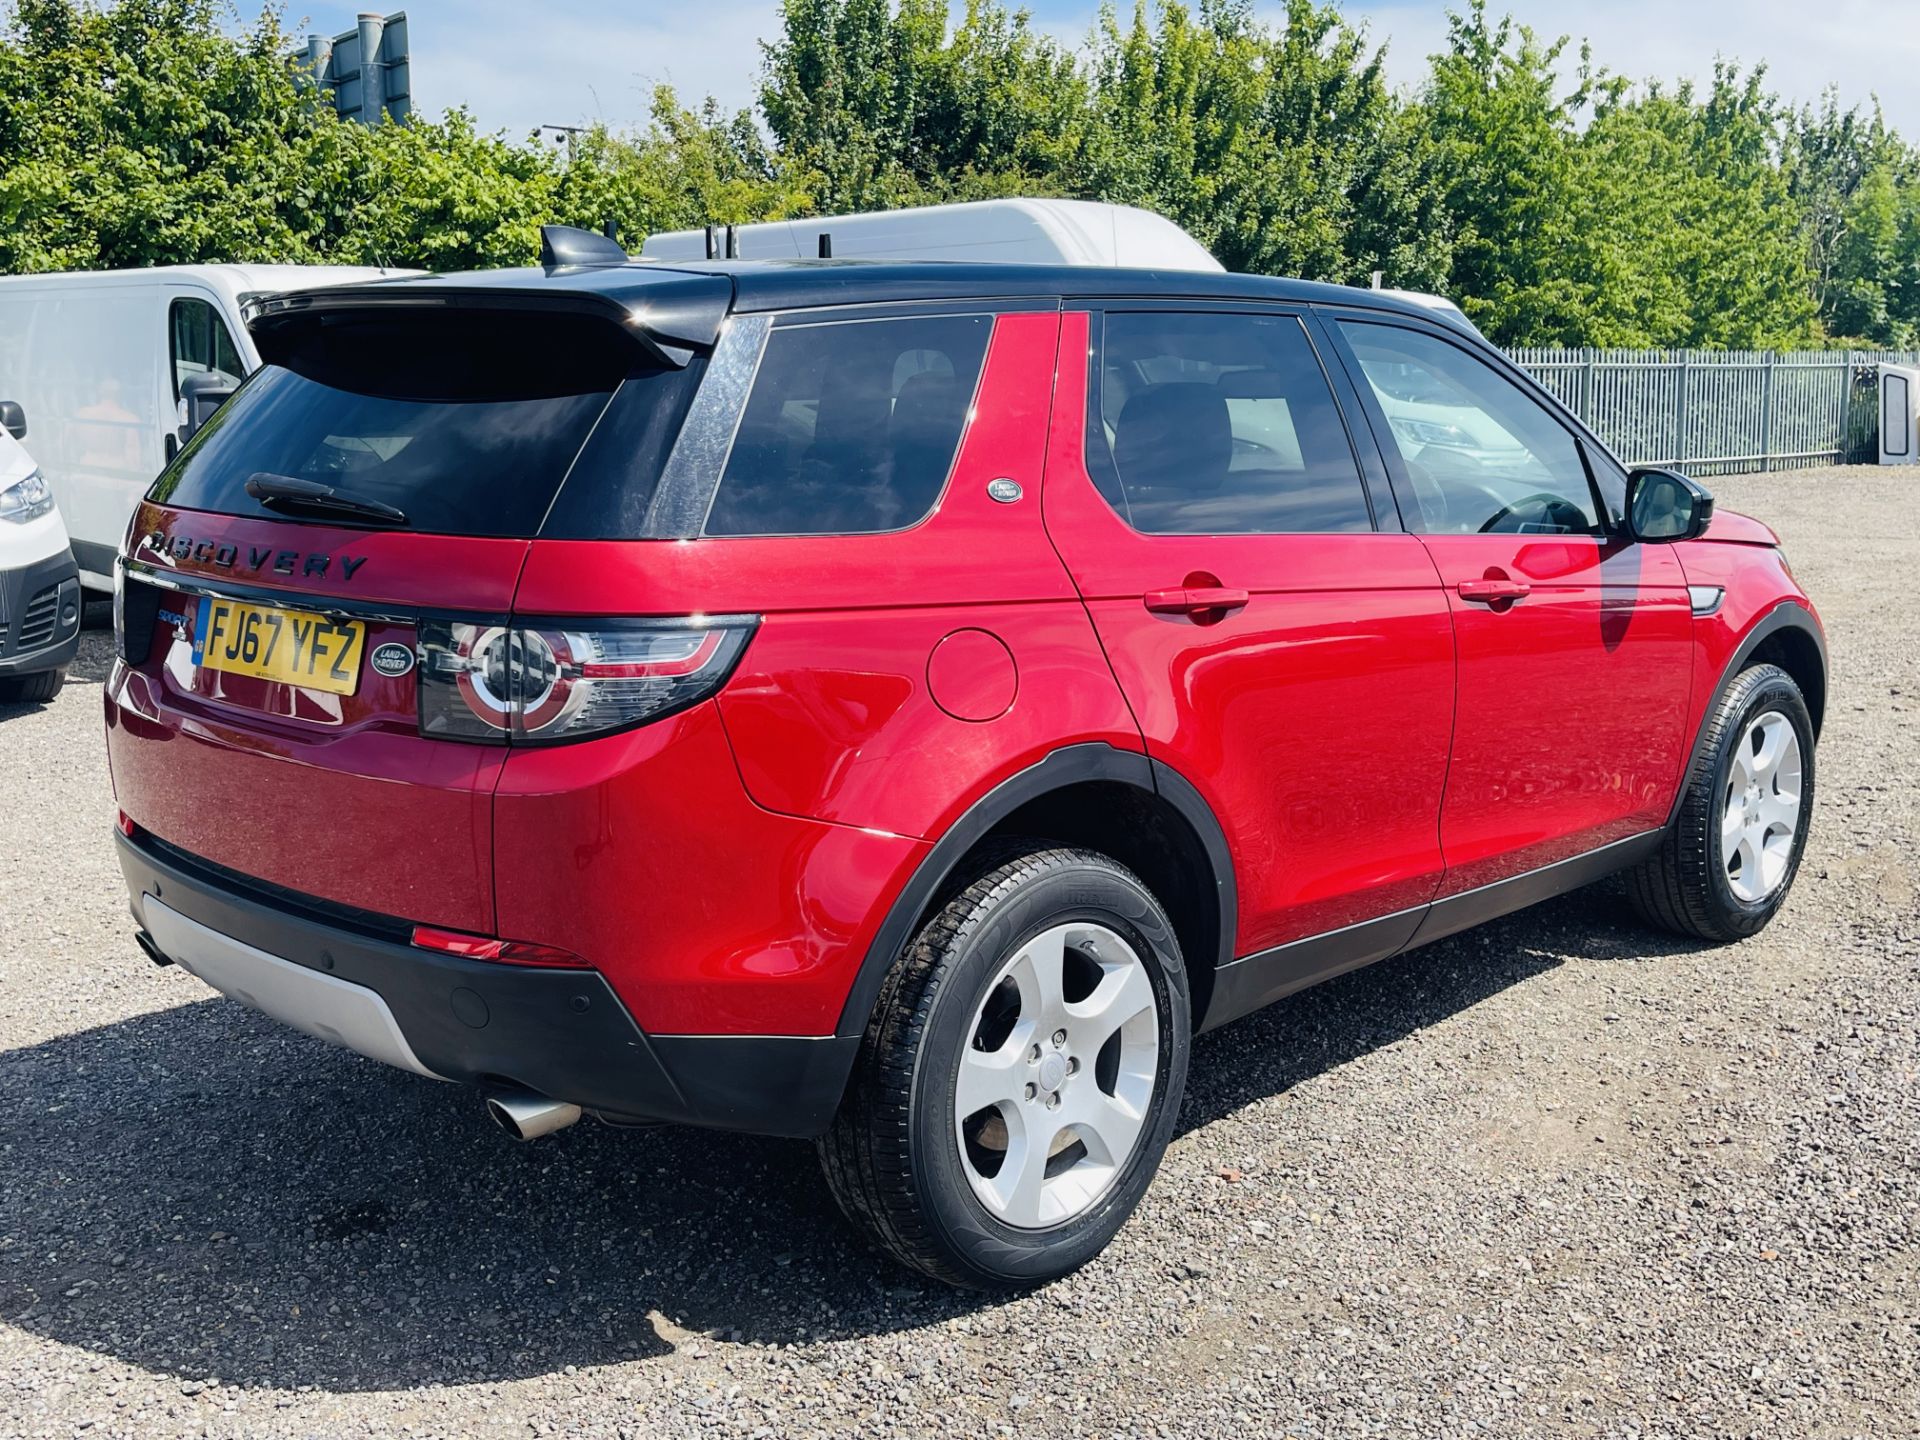 Land Rover Discovery Sport HSE 2.0 ED4 2017 '67 Reg' Sat Nav - Panoramic Glass Roof - ULEZ Compliant - Image 13 of 33